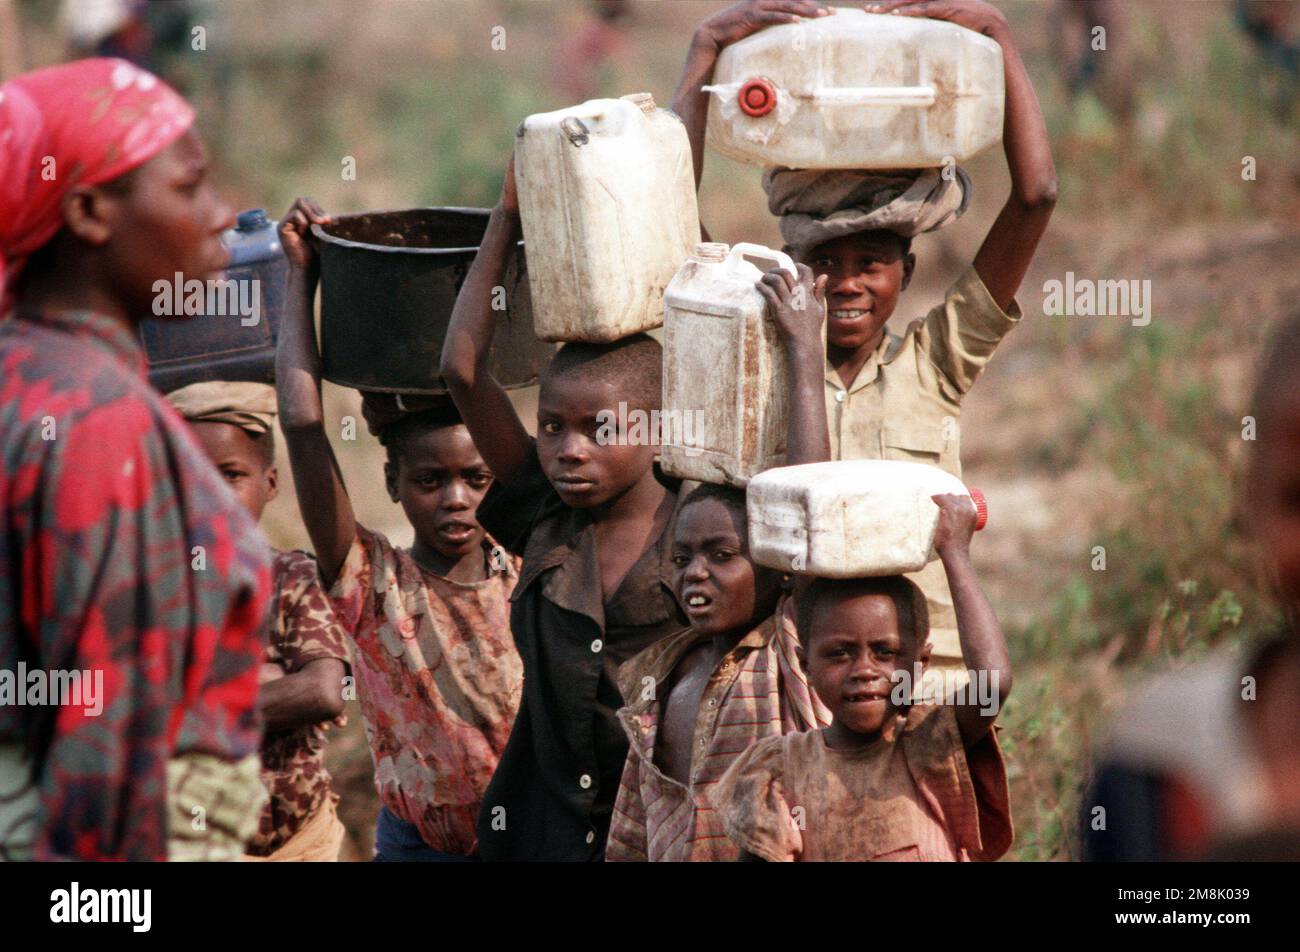 Children, displaced refugees from Rwanda's bitter civil war between the Hutus and Tutsis tribes in Southern Africa, carry containers of water atop their heads. From AIRMAN Magazine's December 1994 issue 'Front Cover' and issue 'Will You Please Pray for US?' -Relief for Rwandan Refugees. Country: Zaire (ZAR) Stock Photo